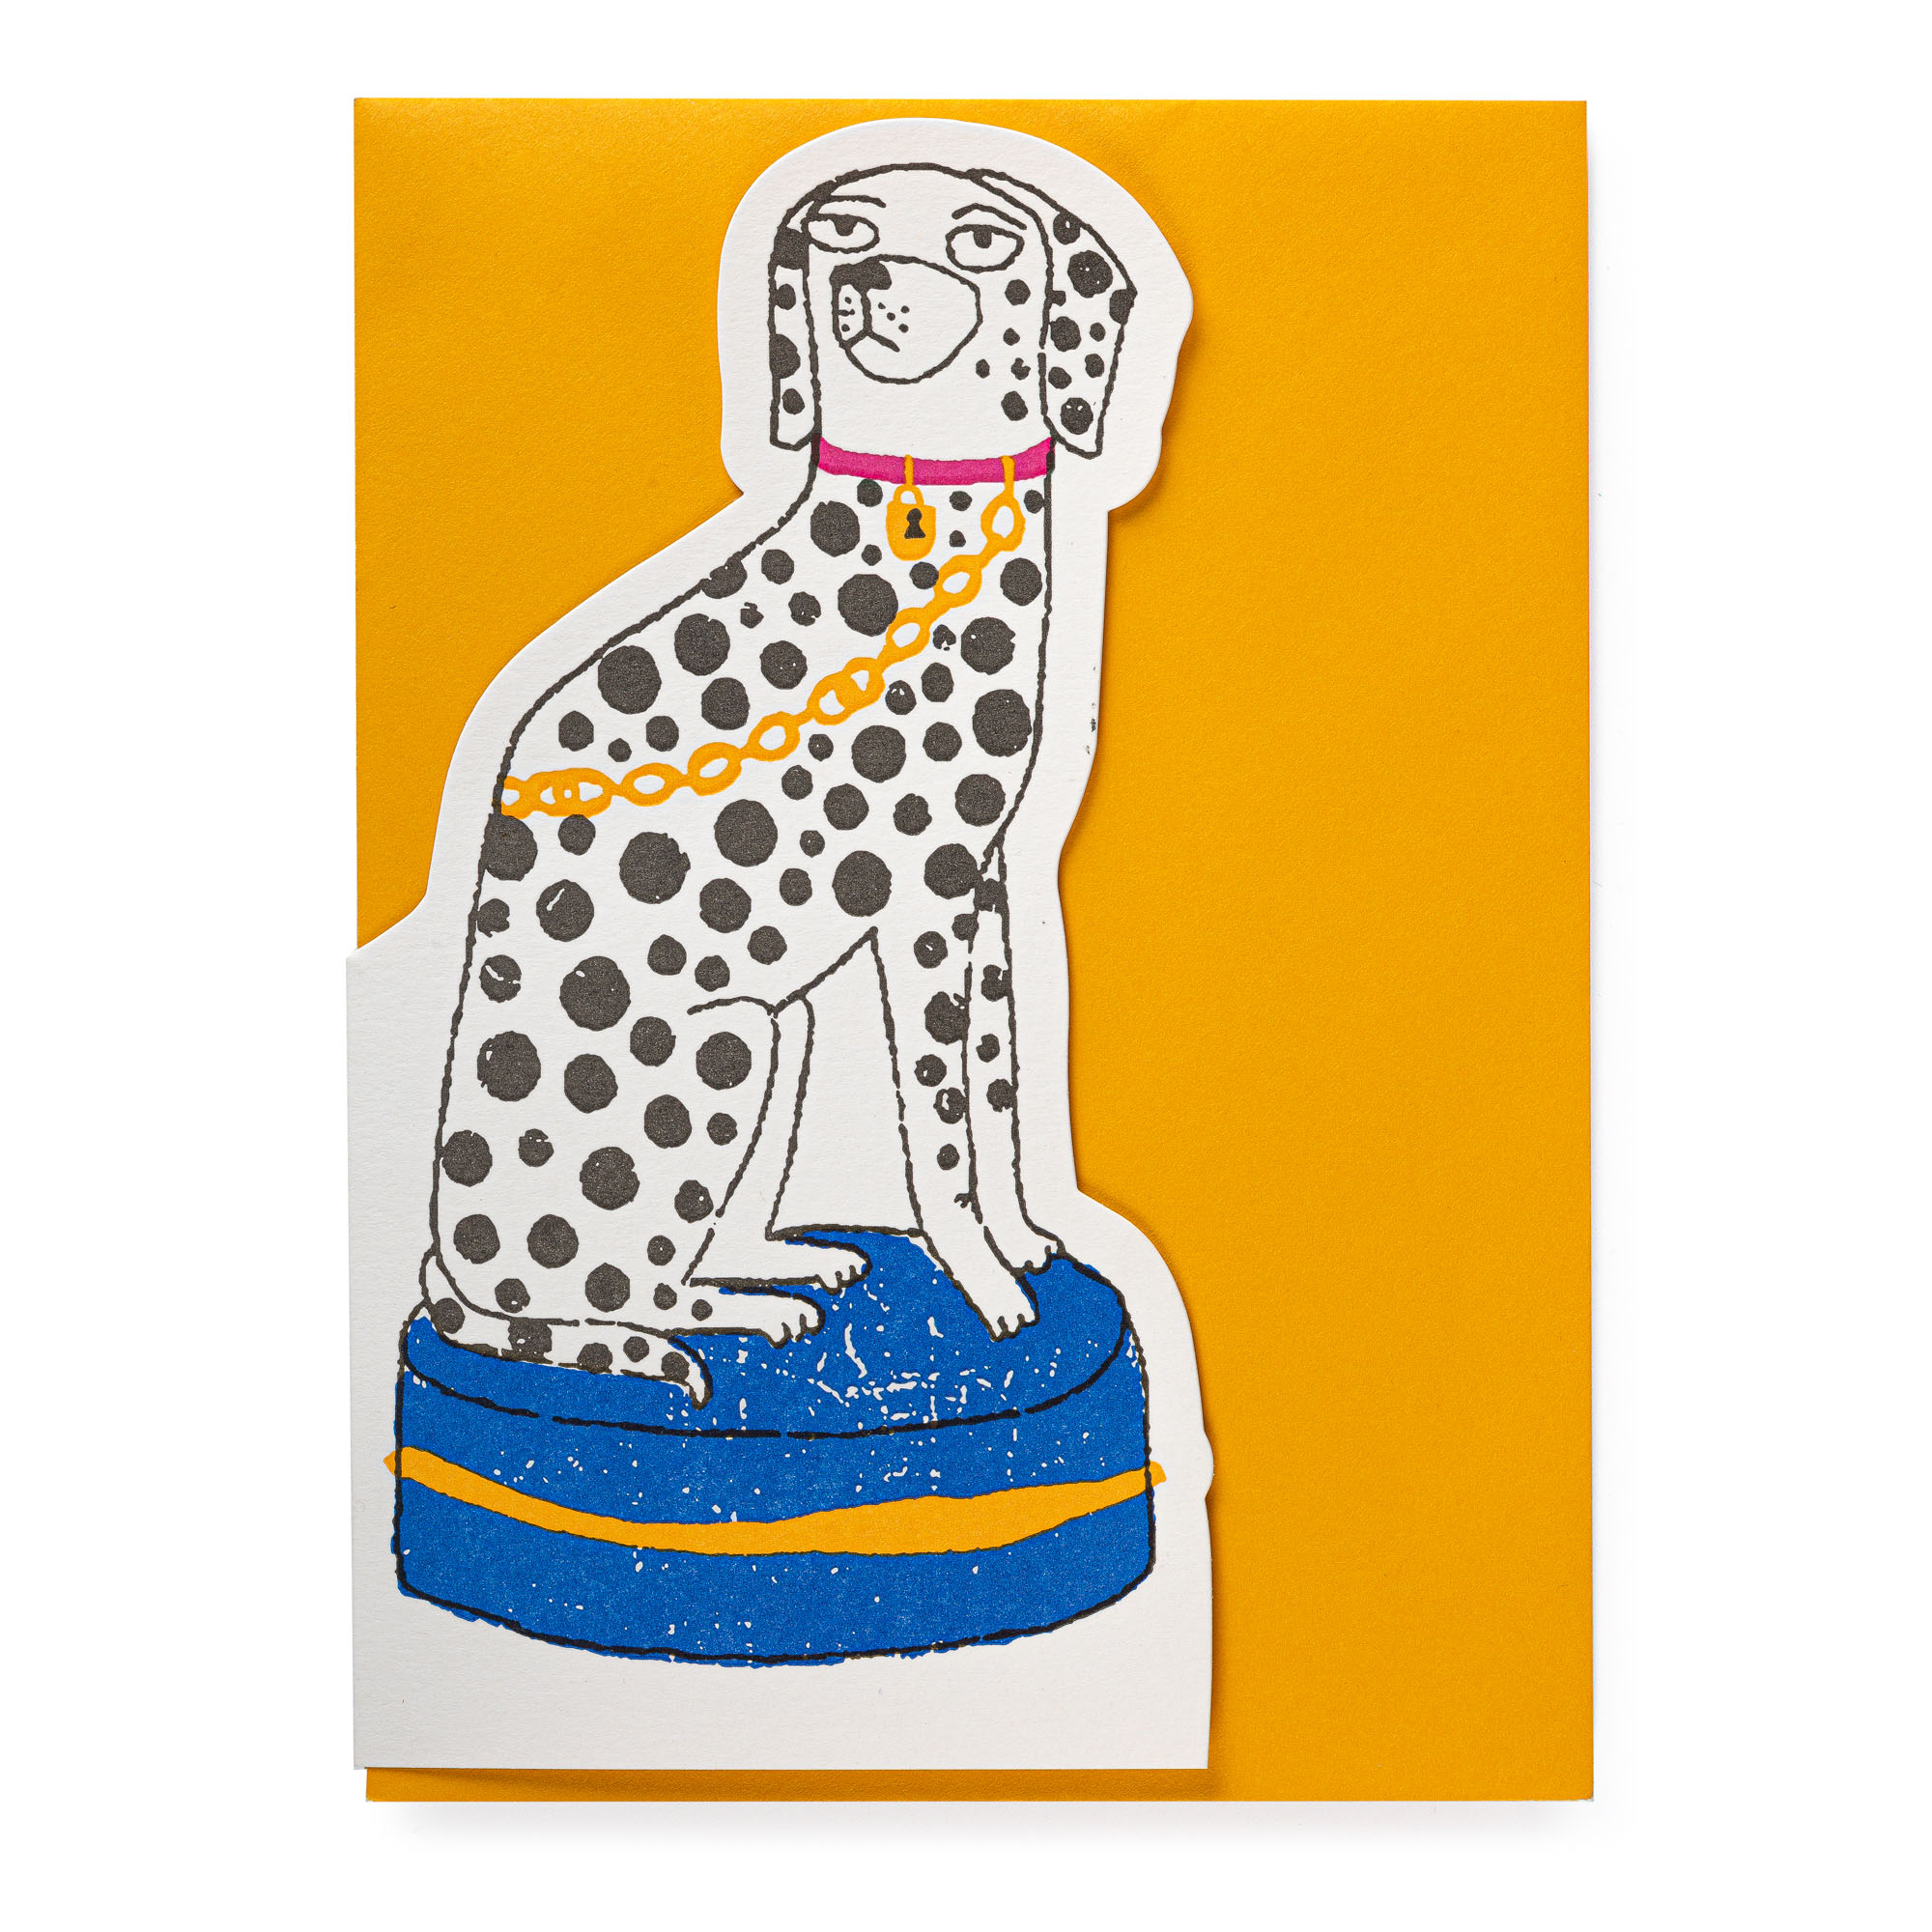 Dalmatian - Cut-out Cards - Charlotte Farmer - from Archivist Gallery view